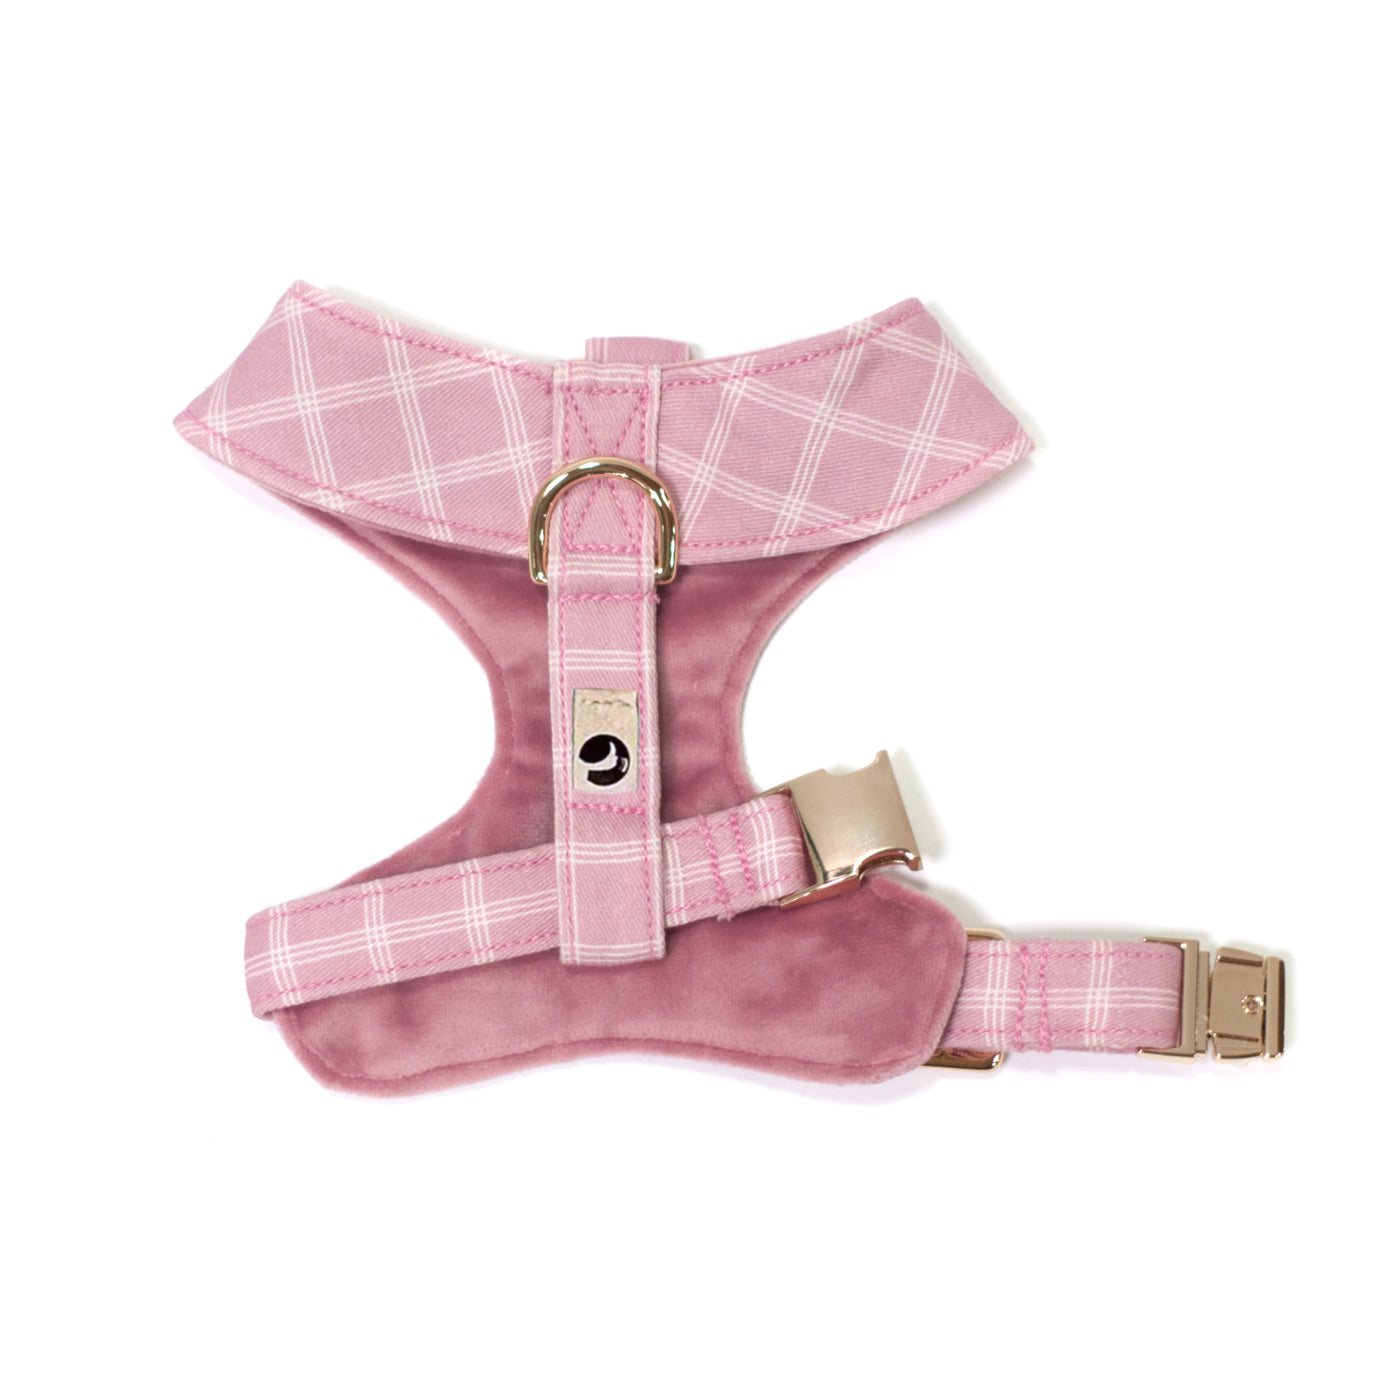 Extra small pink reversible dog harness with gold buckle